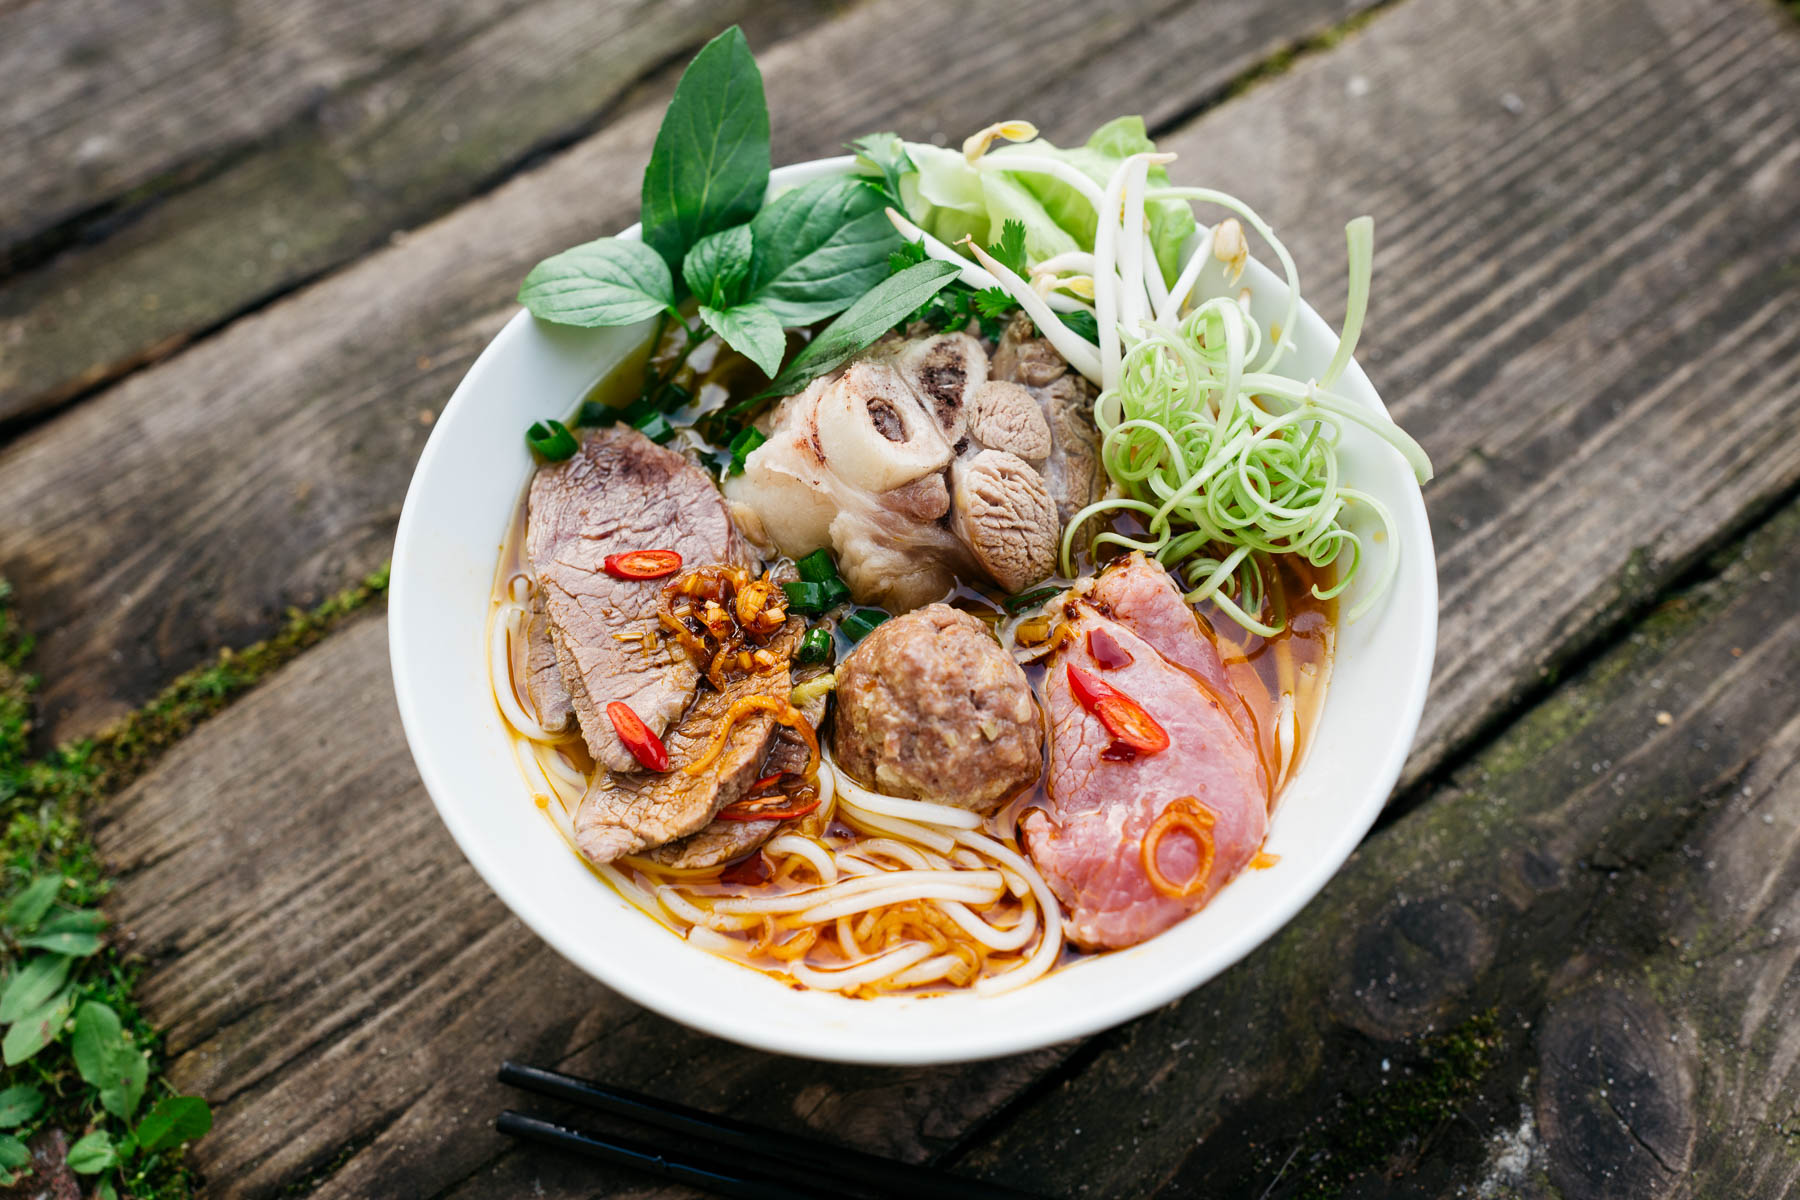 Bun Bo Hue The Spicy and Flavorful Vietnamese Noodle Soup